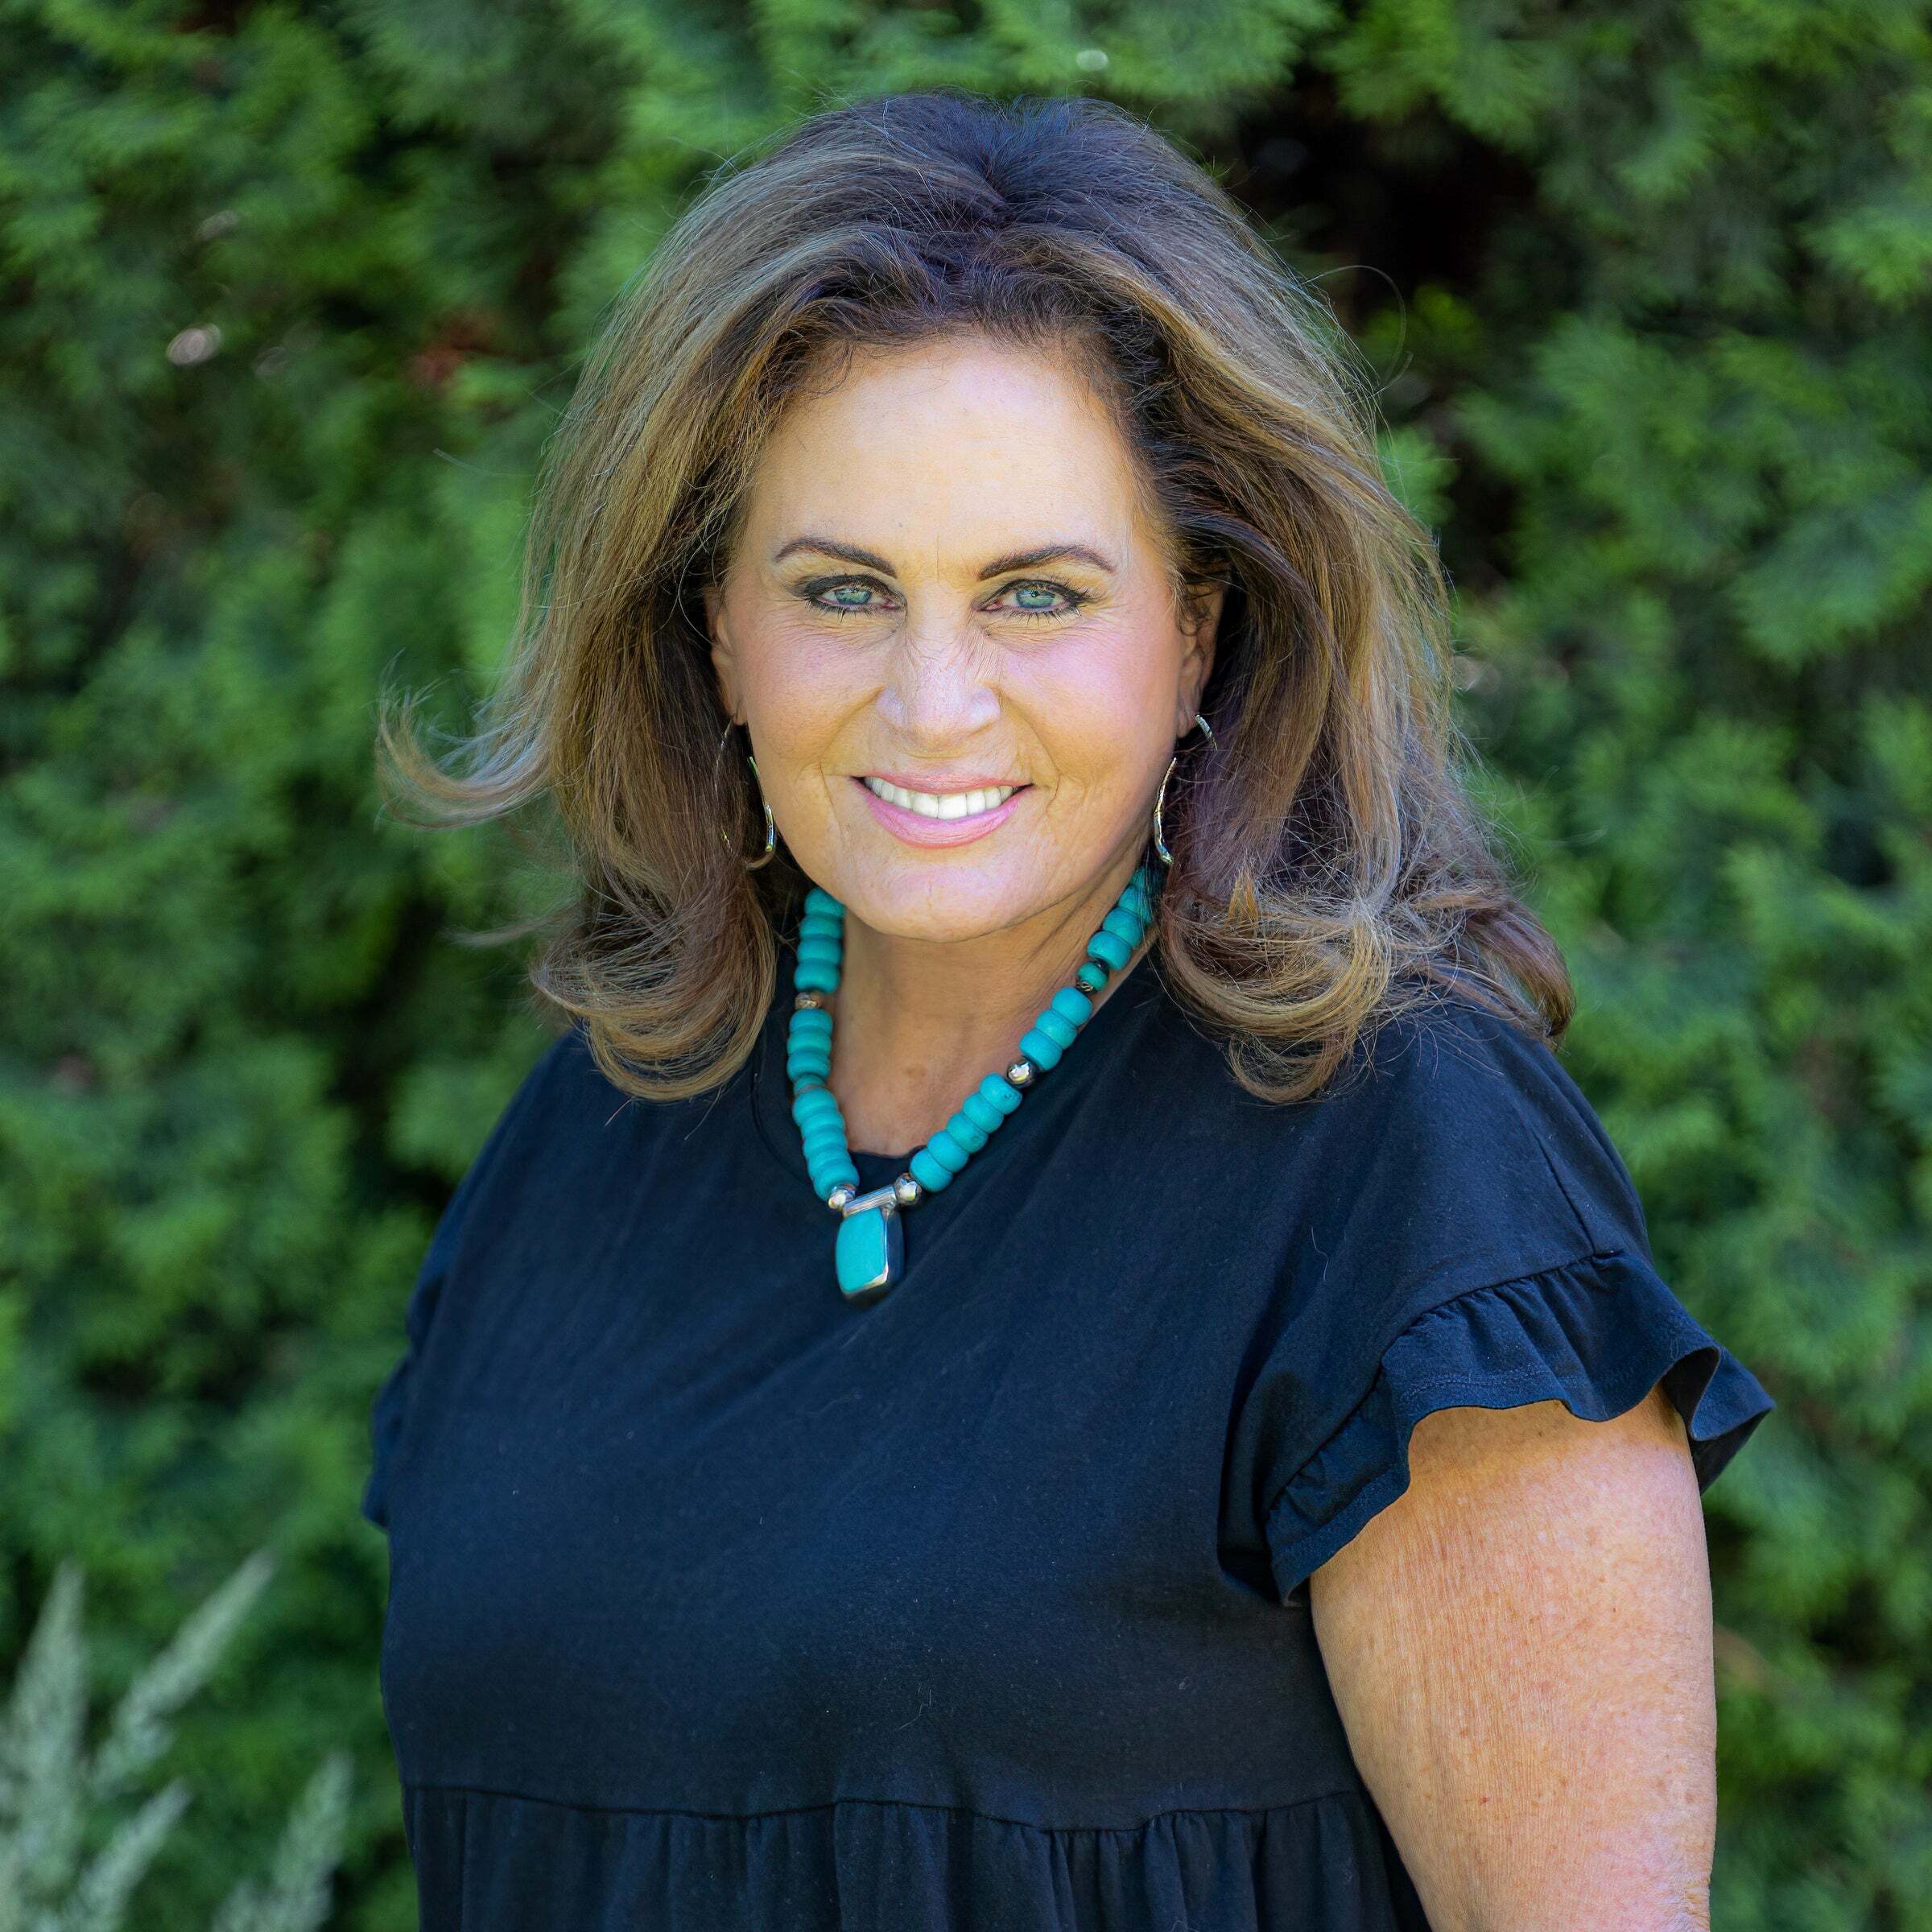 Helena Newby-Hafer, Real Estate Salesperson in Nampa, Home 2 Home